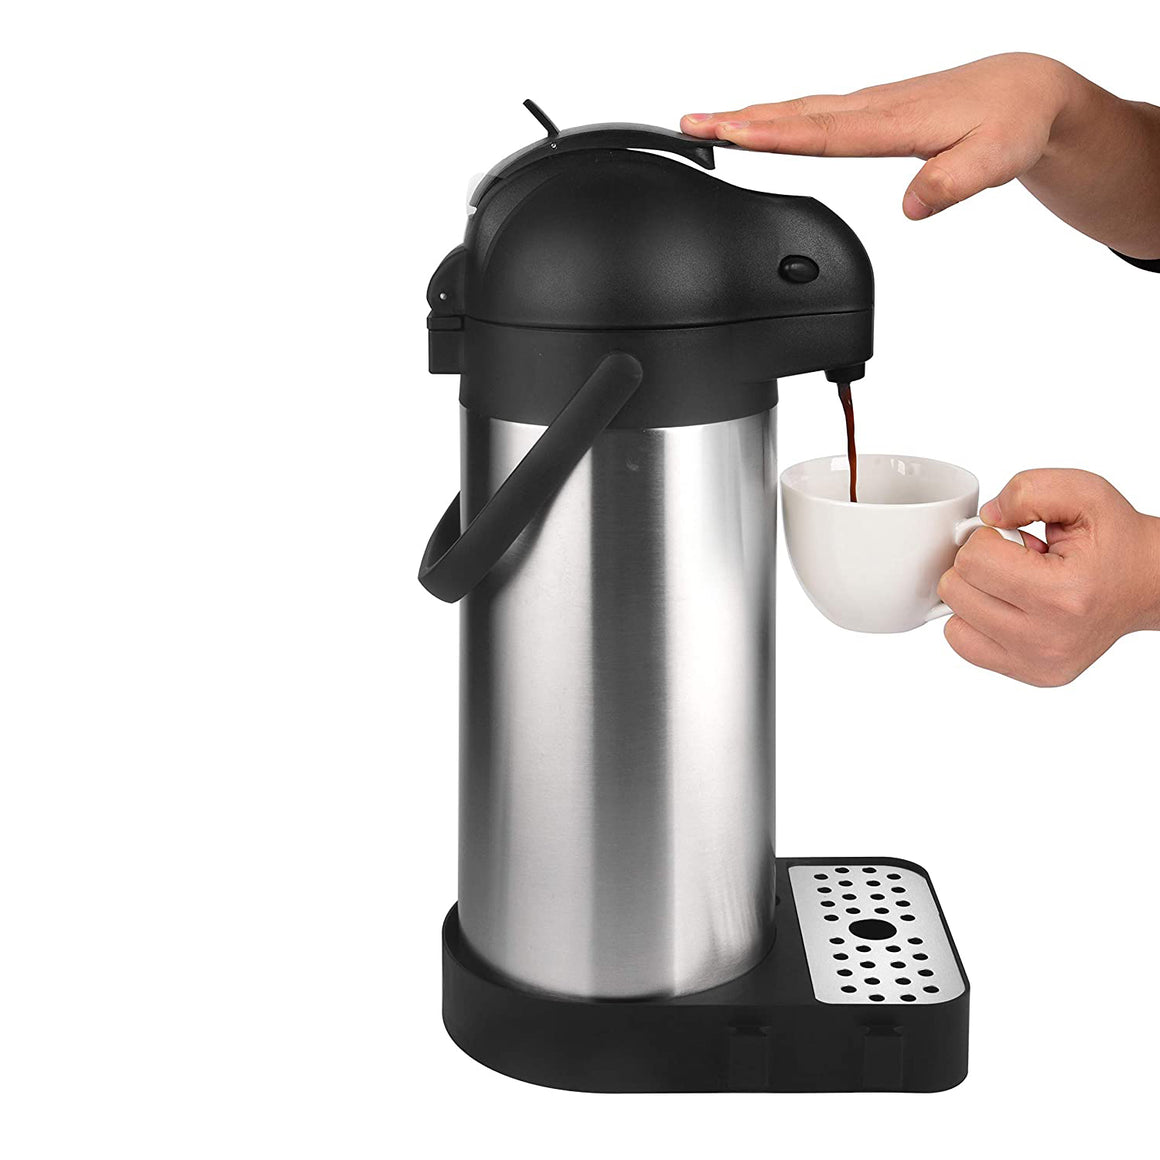 68 Oz (2L) Stainless Steel Thermal Coffee Carafe - Cresimo